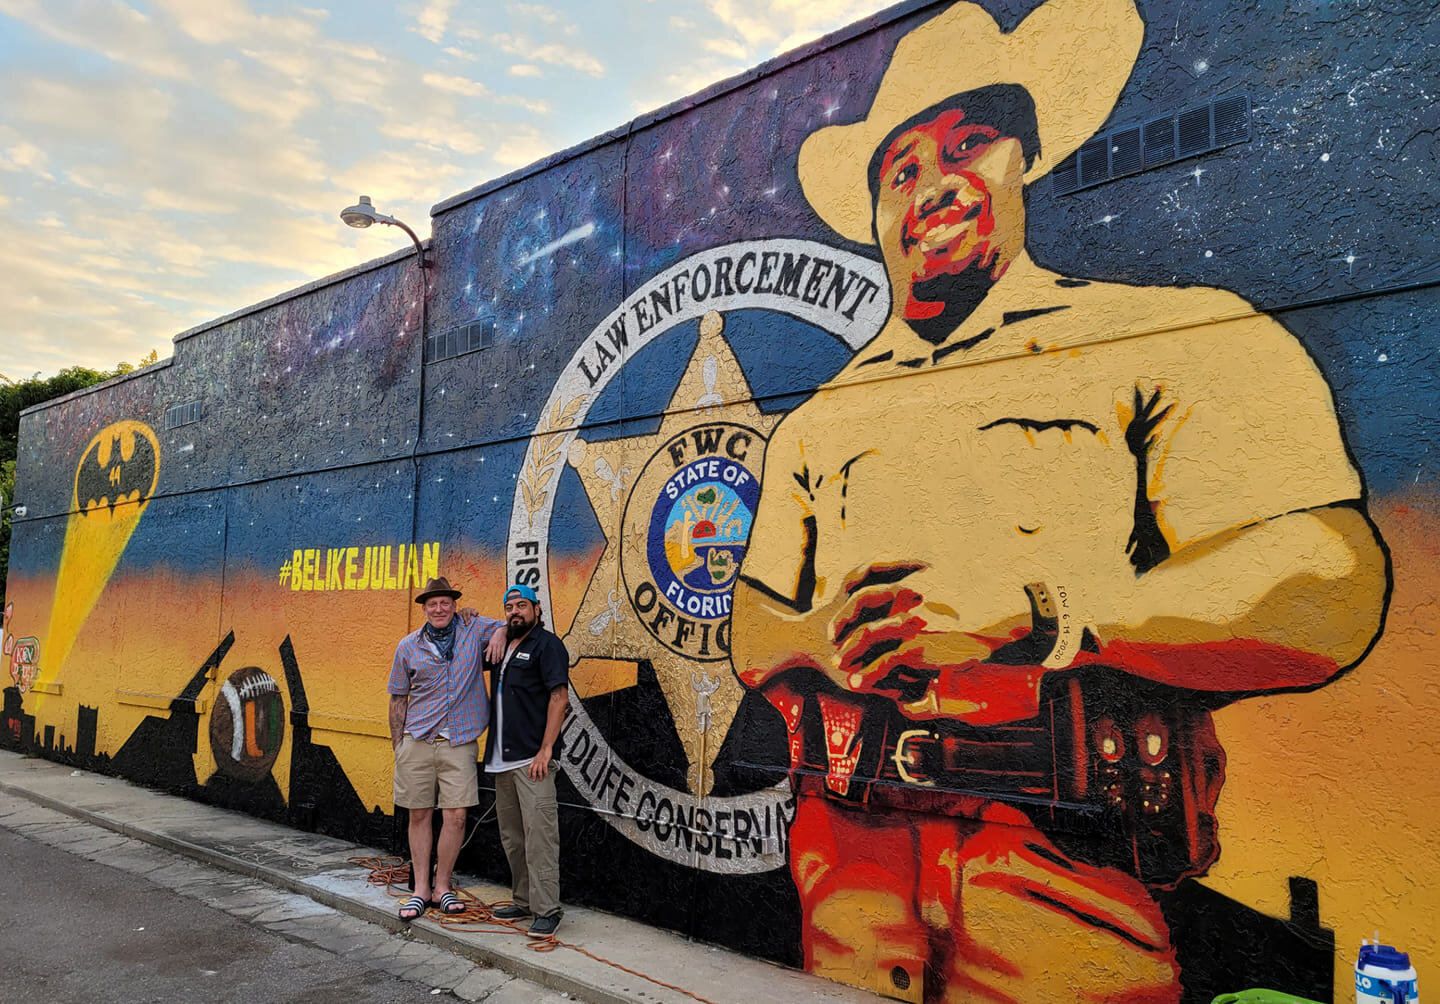 Two people pose for a photograph in front of the mural